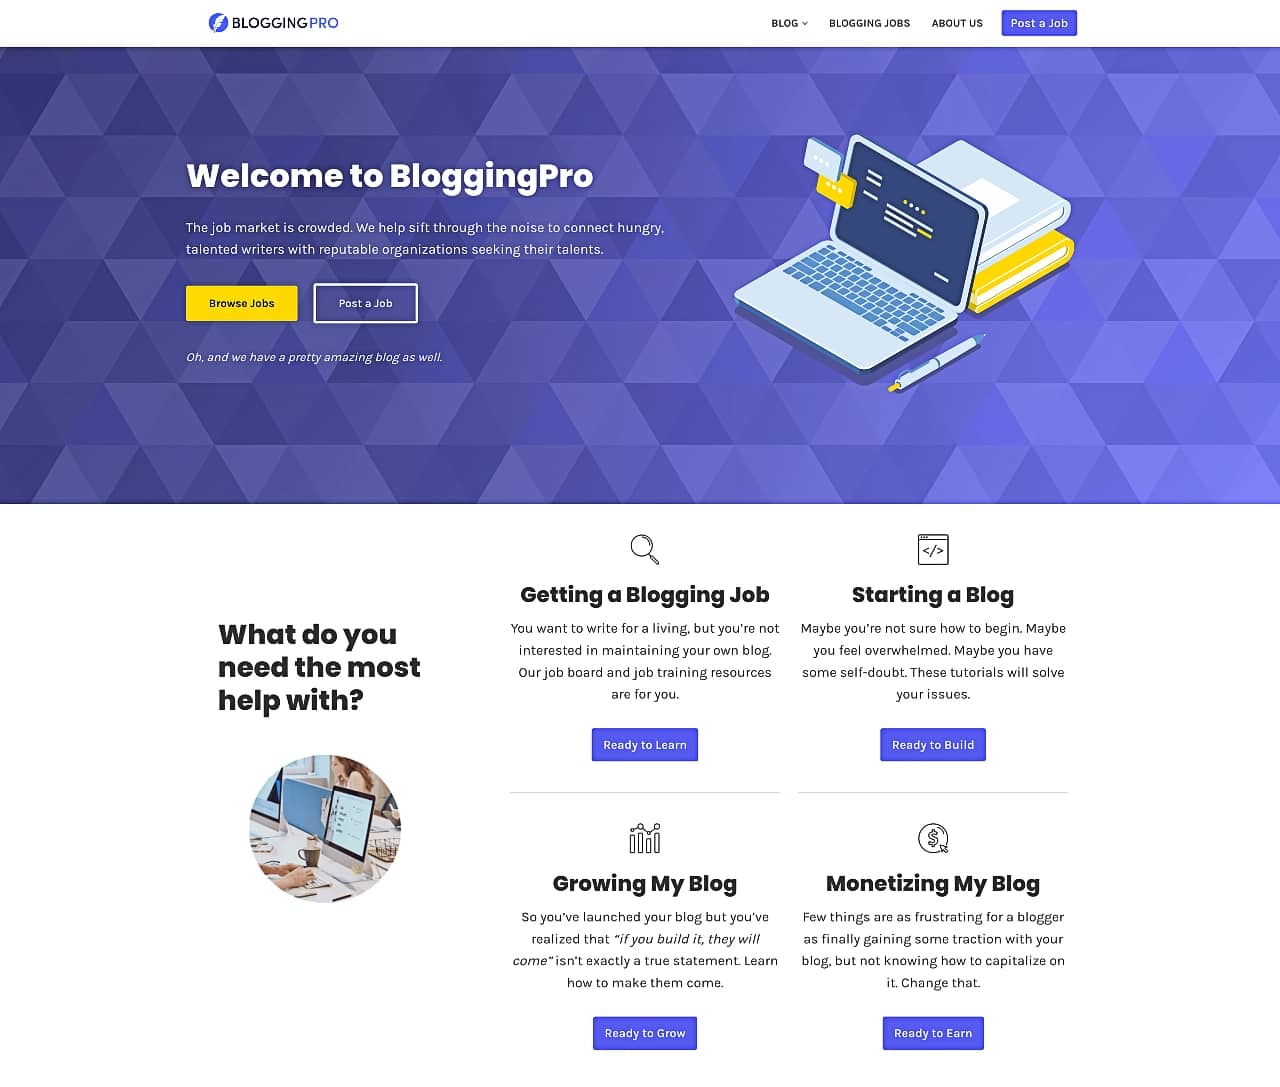 A very user-centric landing page example from BloggingPro.